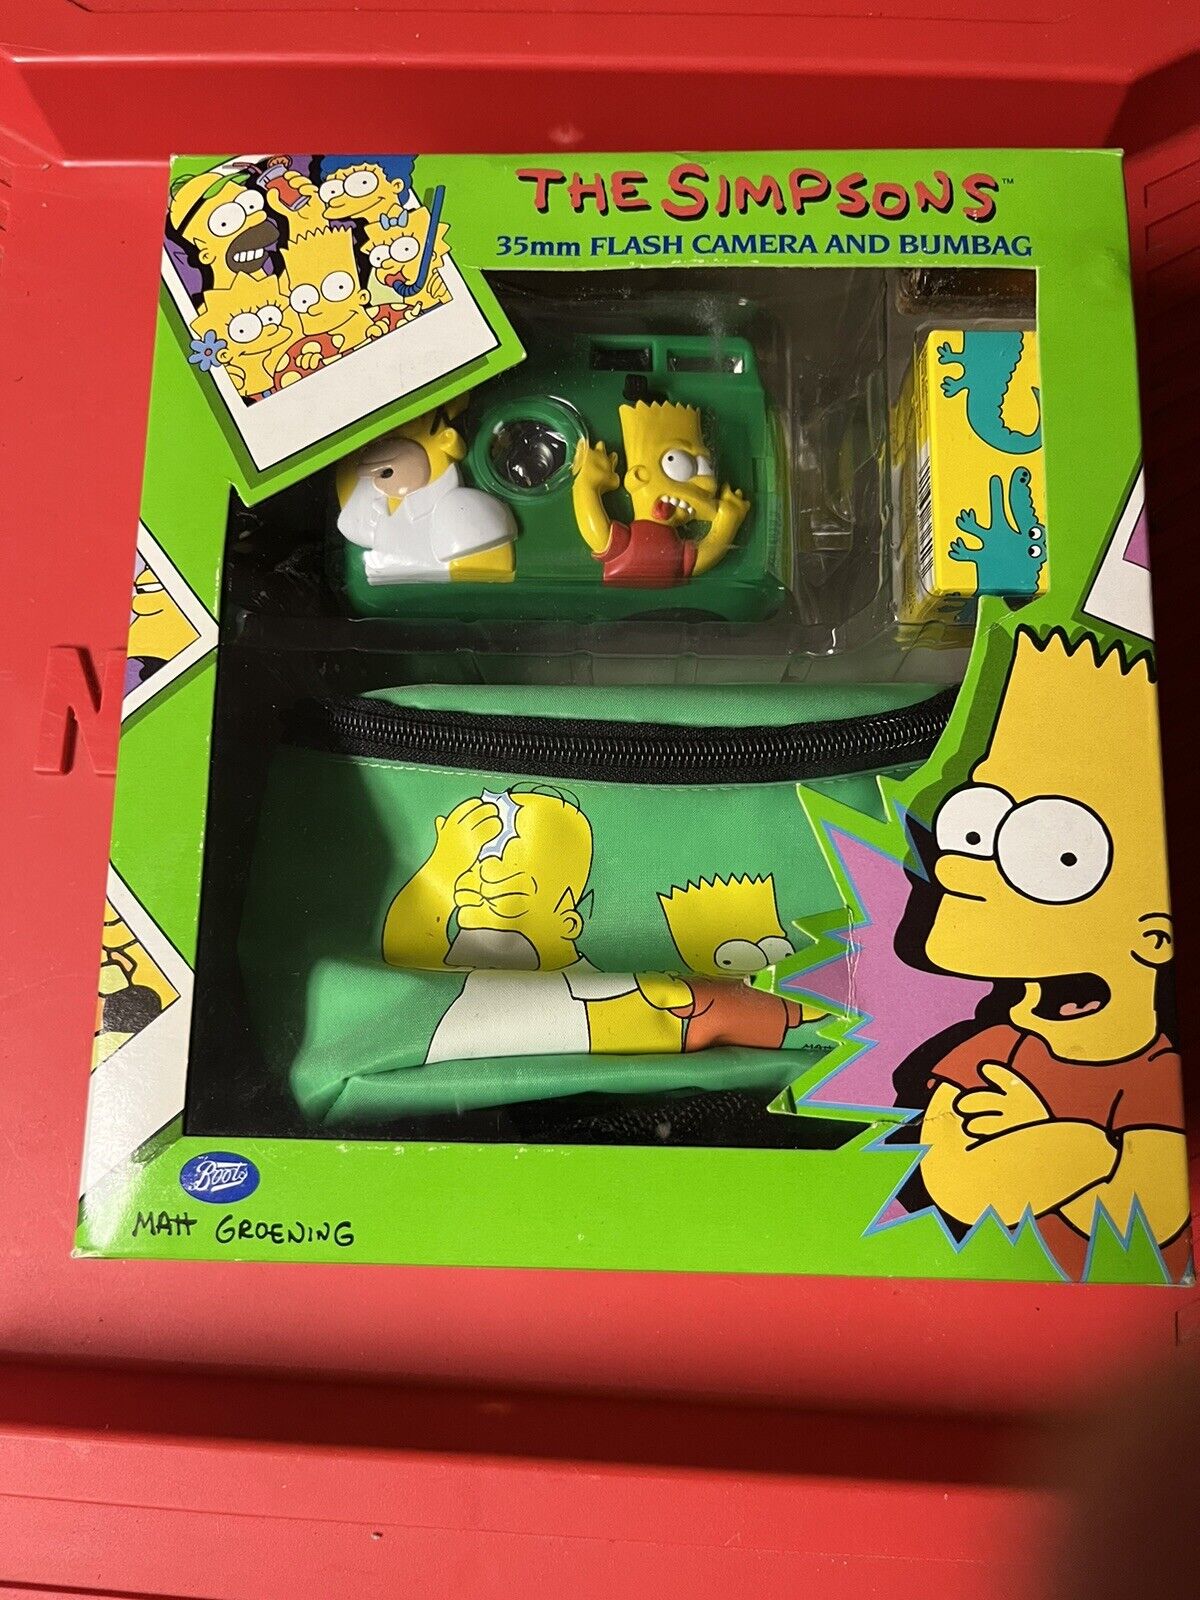 The Simpsons 35mm Flash Camera And Bumbag